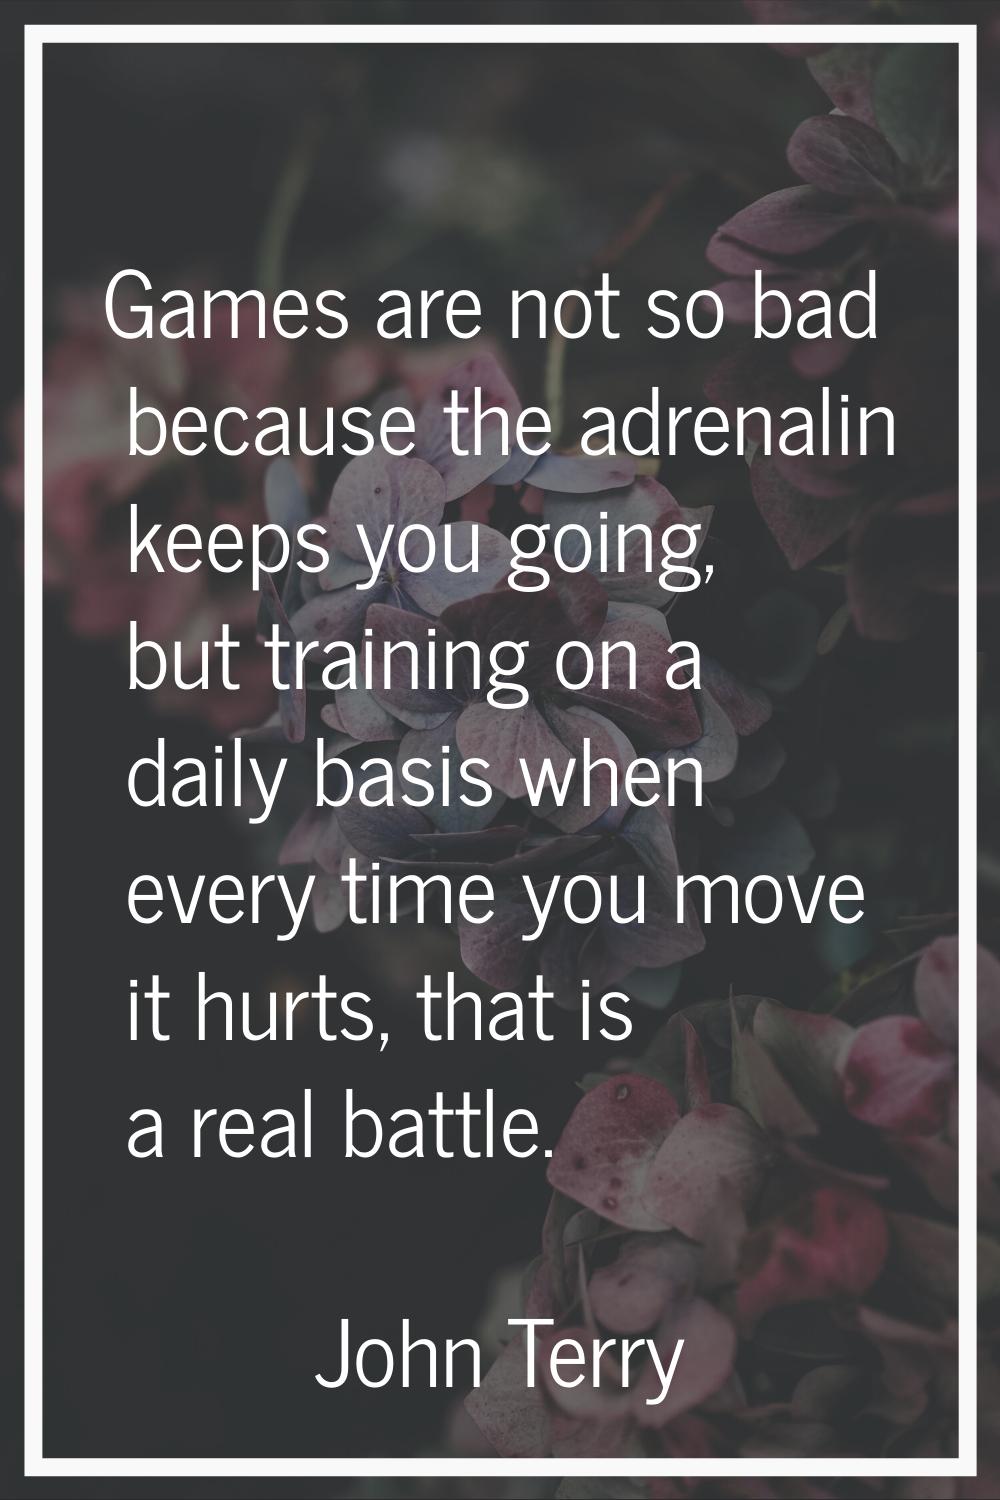 Games are not so bad because the adrenalin keeps you going, but training on a daily basis when ever